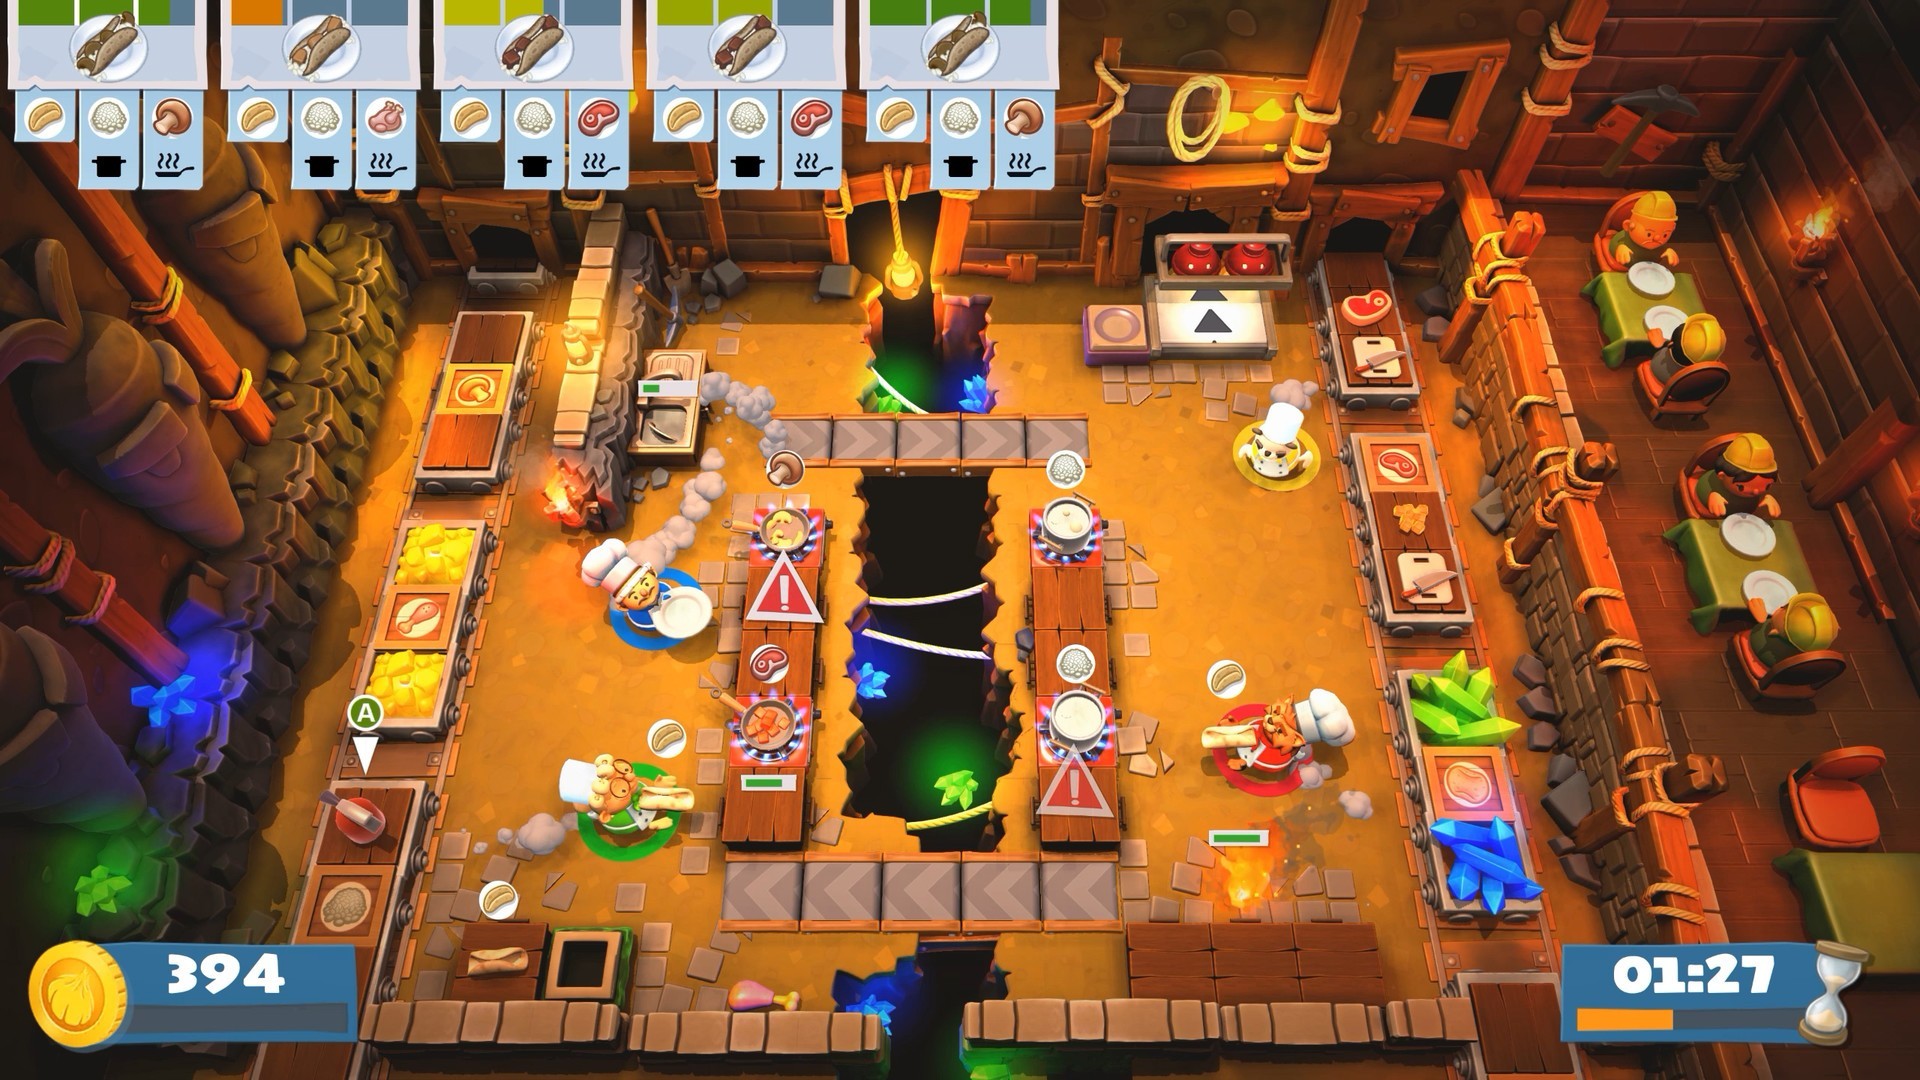 overcooked 2 switch online play